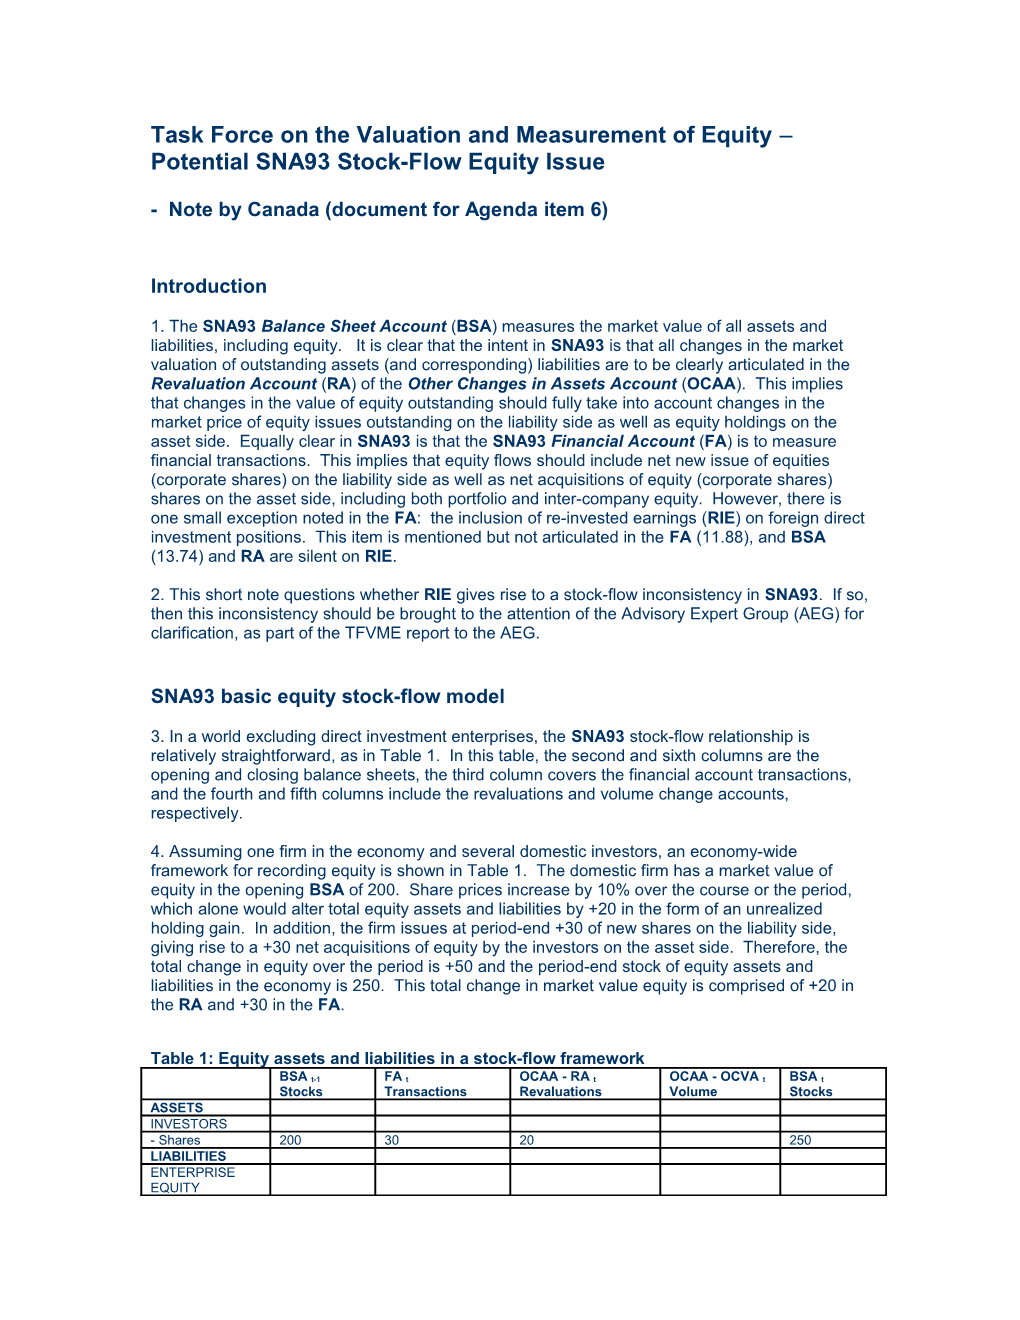 Task Force on the Valuation and Measurement of Equity Potential SNA93 Stock-Flow Equity Issue